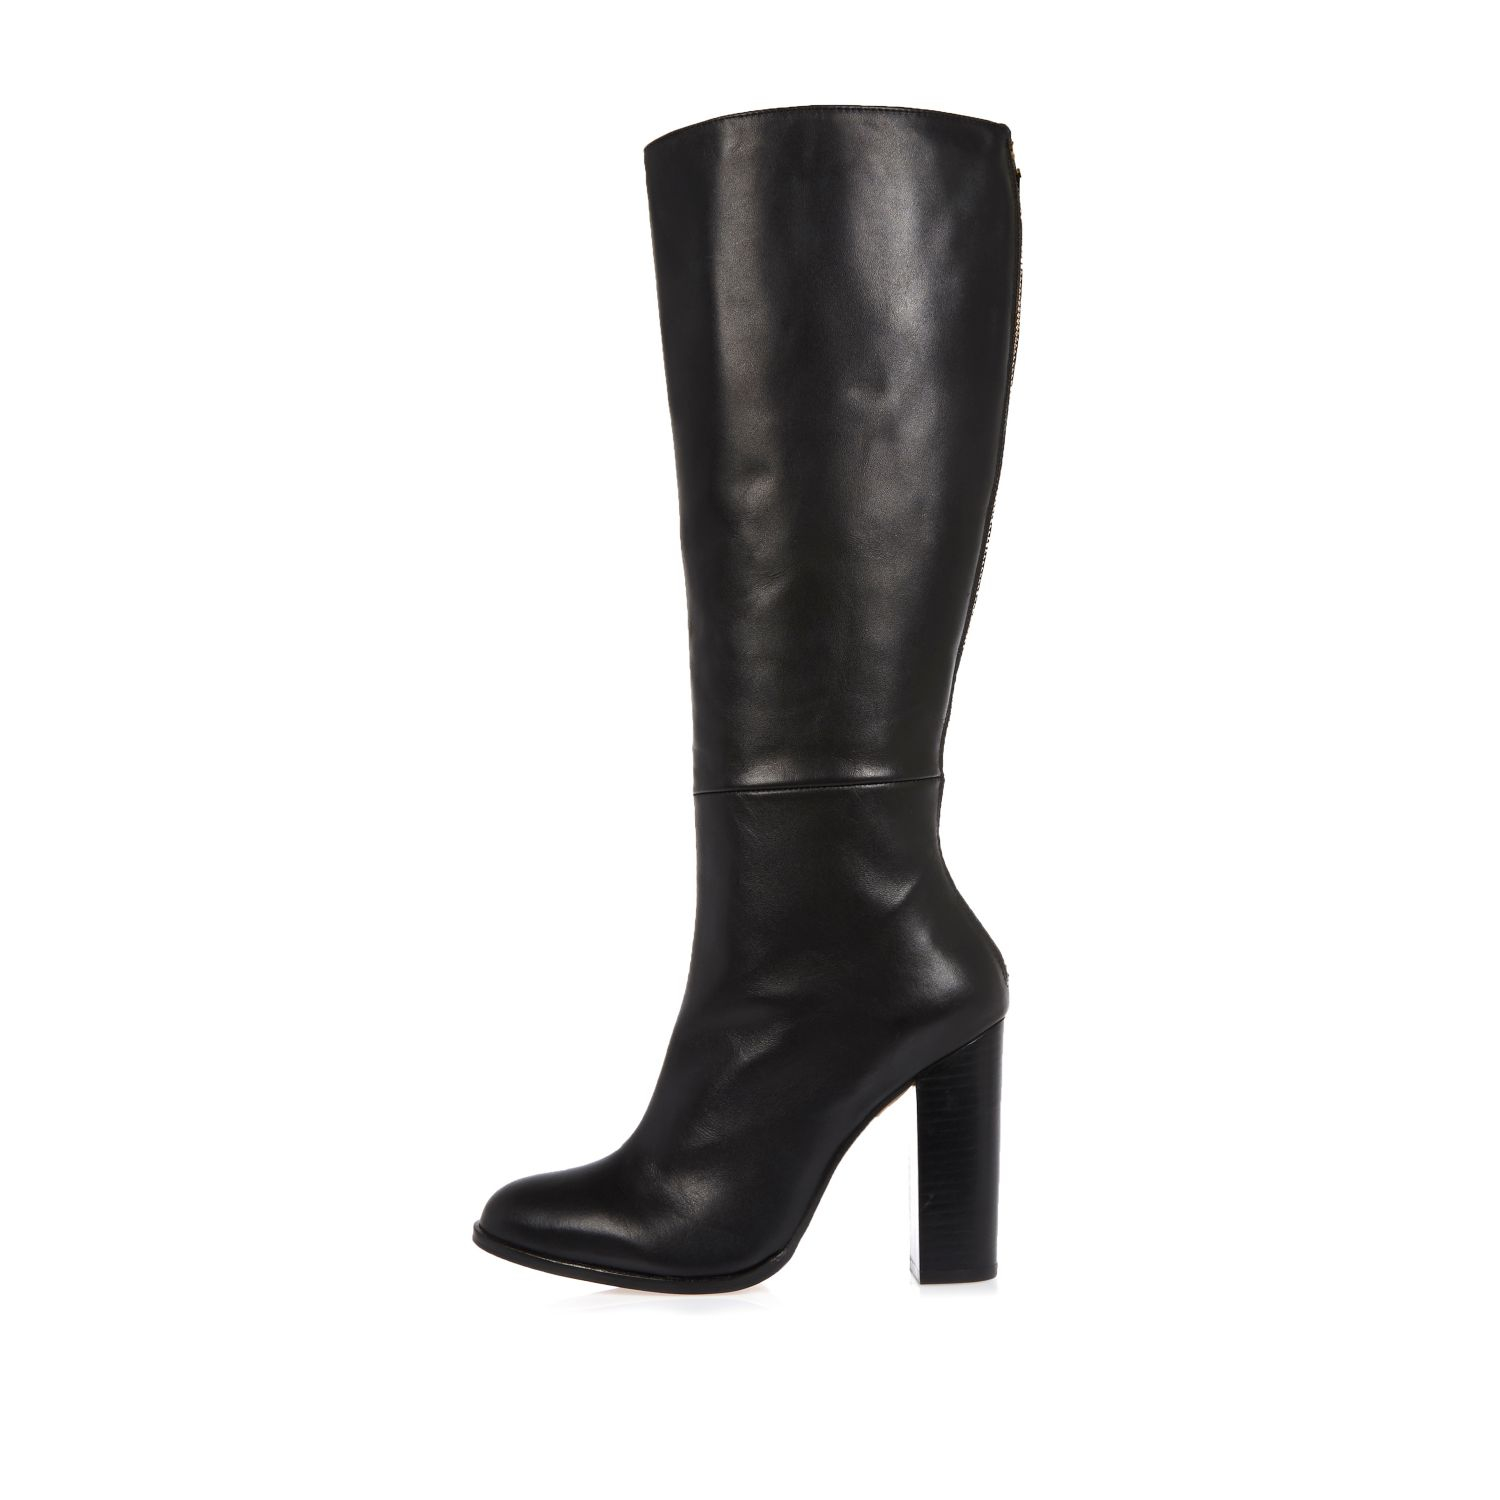 River Island Black Leather Knee High Heeled Boots - Lyst